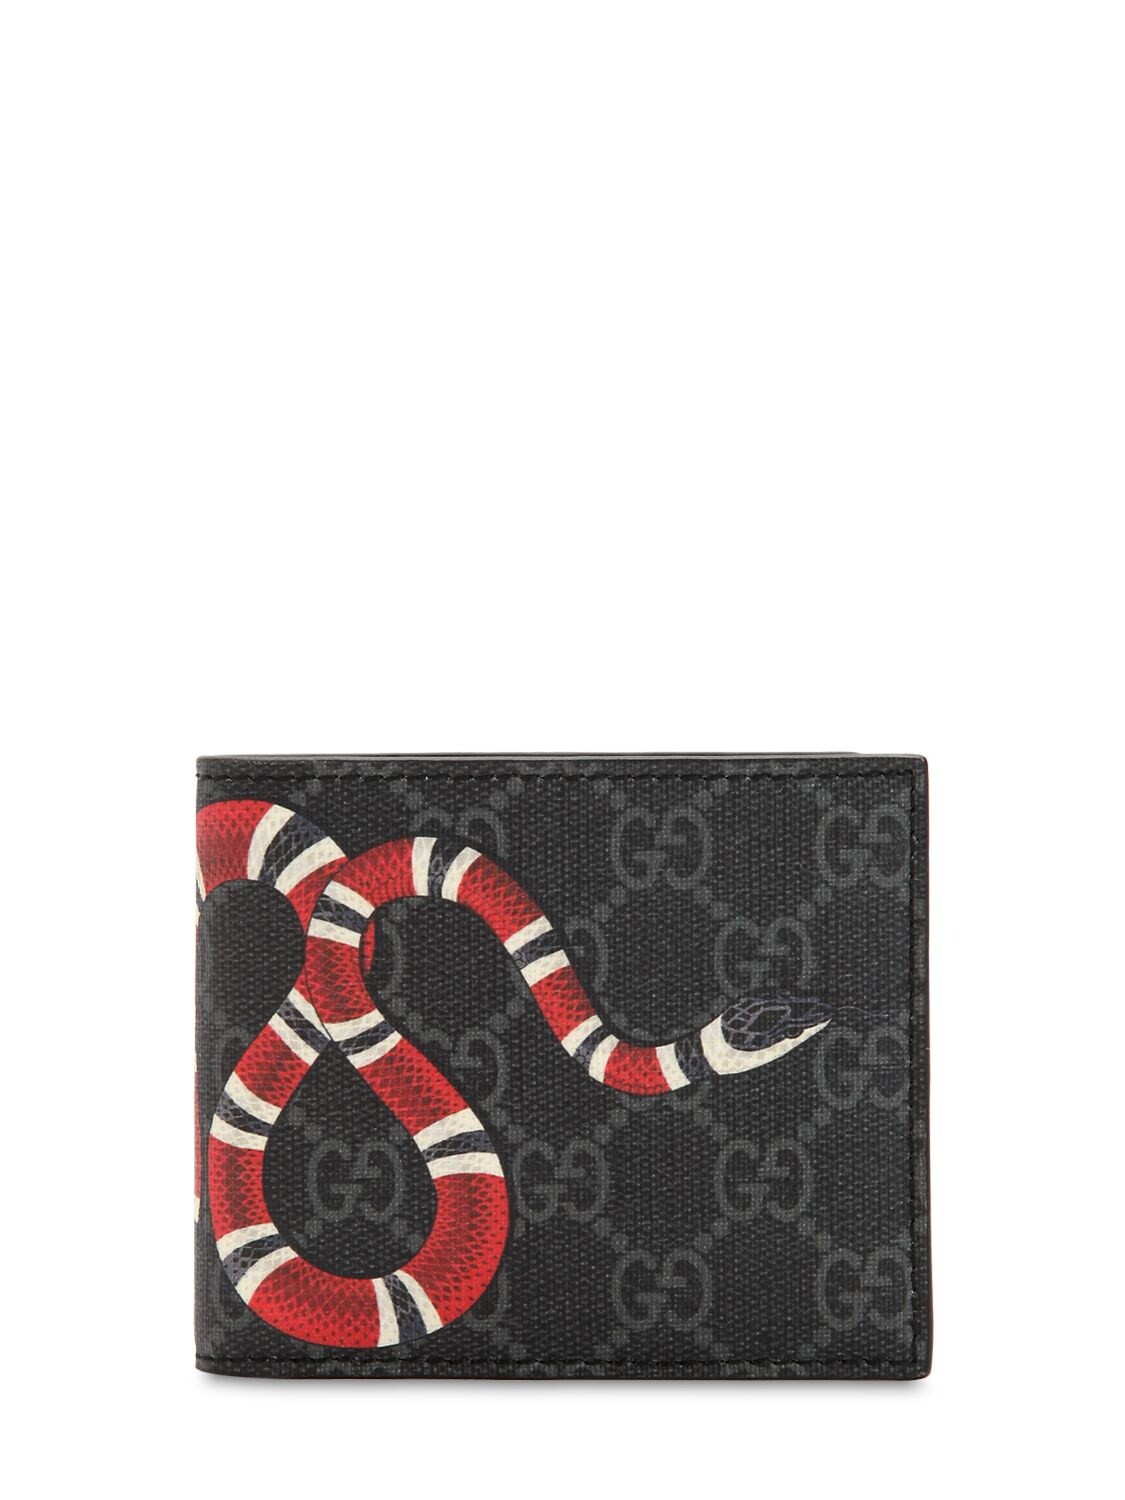 Gucci Snake Printed Gg Supreme Canvas Wallet In Black